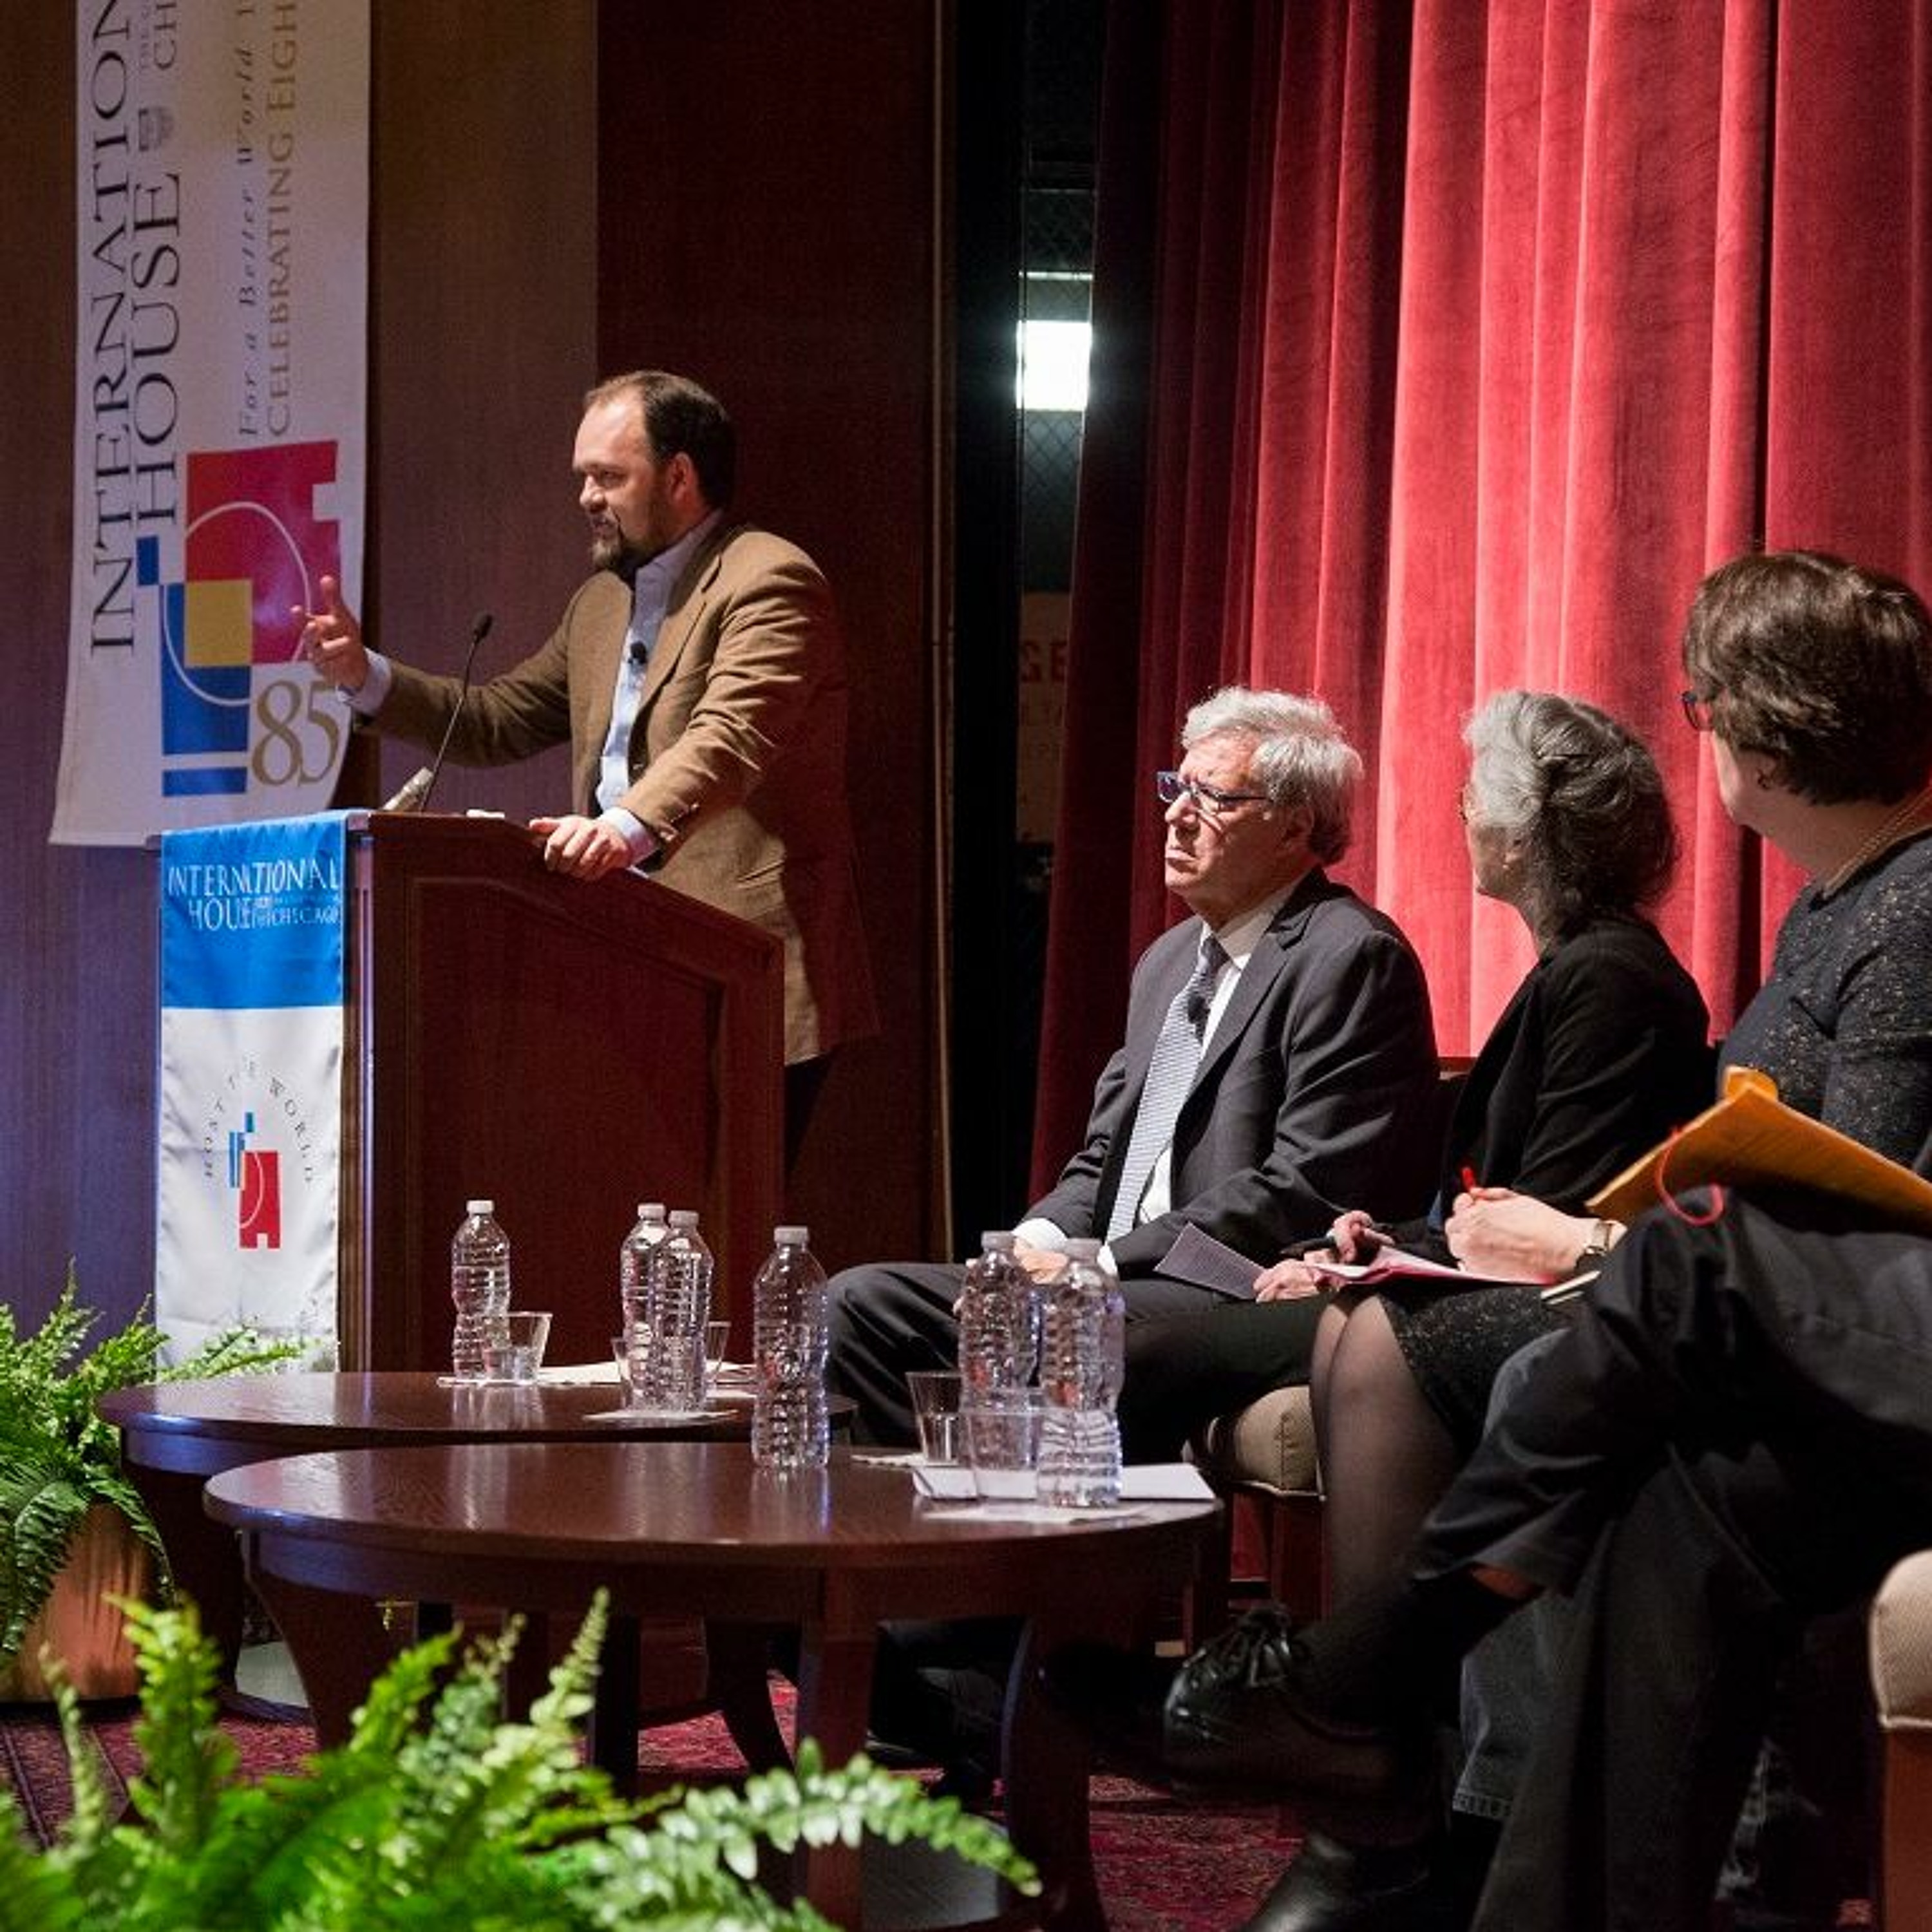 Ross Douthat and Panelists - Religion and Religious Expression in the Academy and Public Life